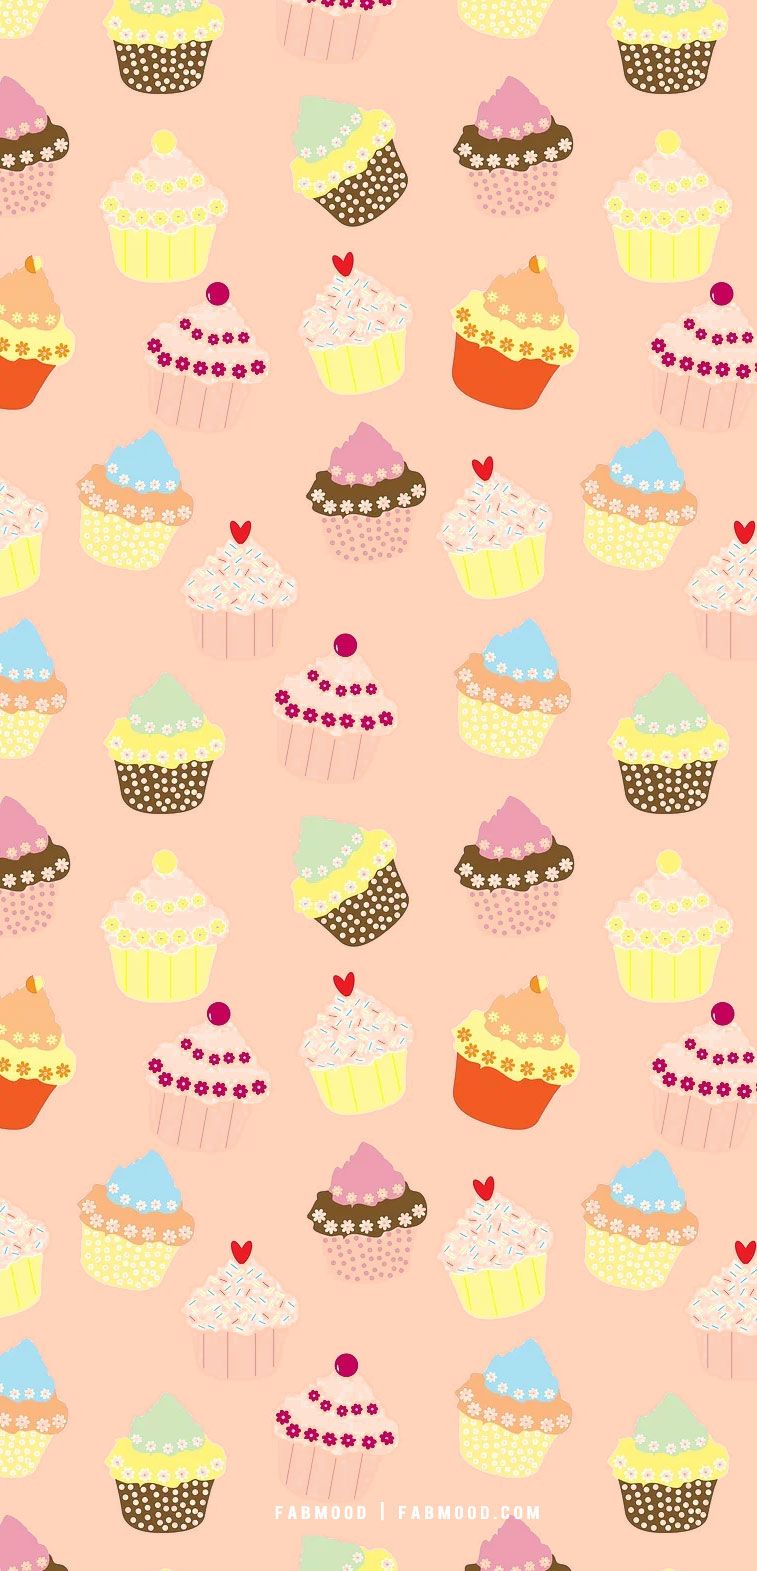 A pattern of cupcakes on pink background - Bakery, food, cake